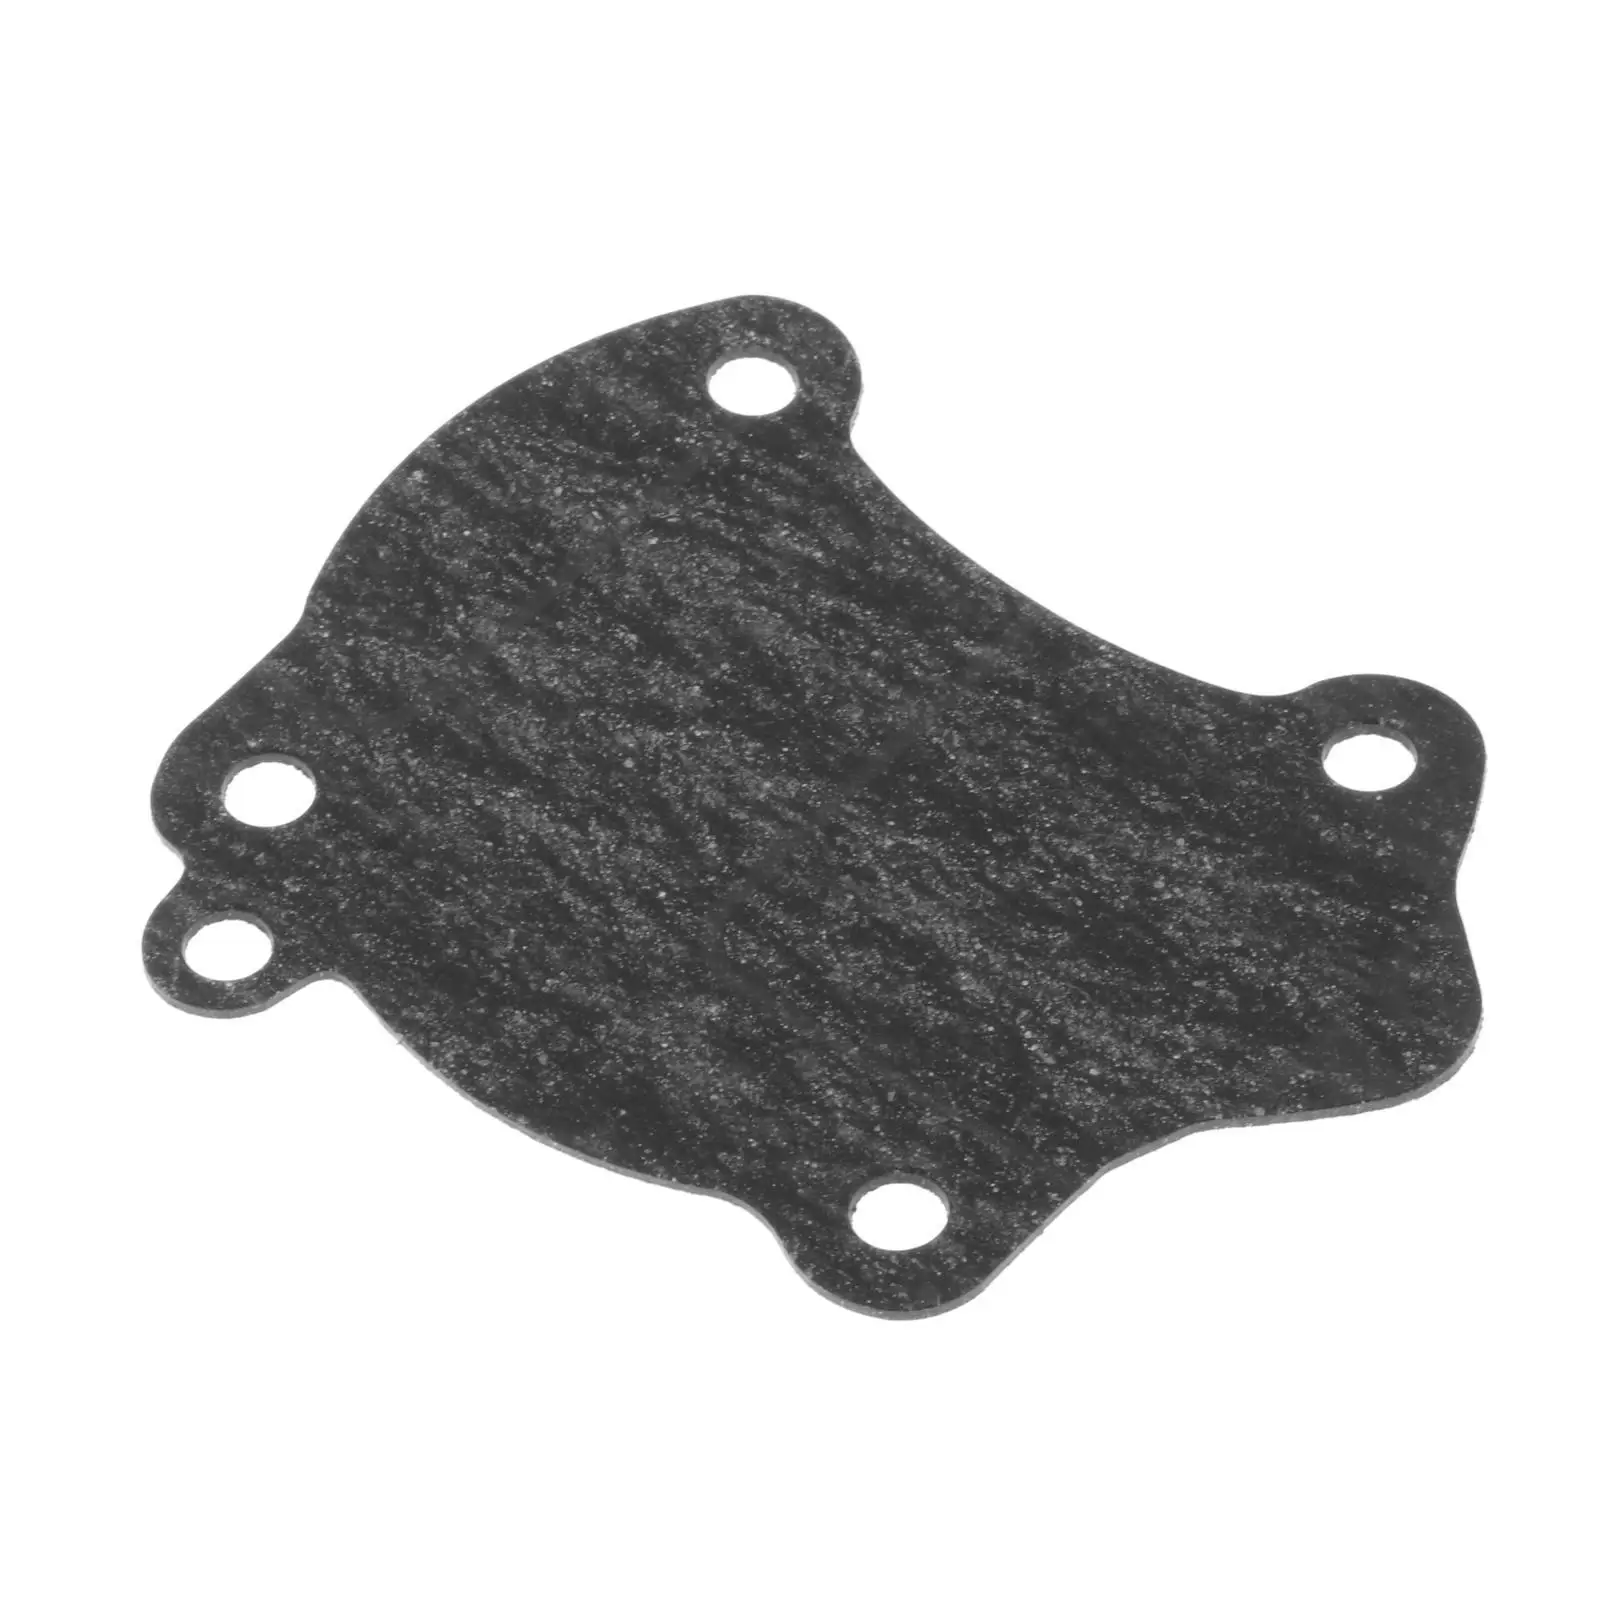 New Head Cover Gasket Replacement Compatible with Yamaha Outboard 4 hp 5 hp 2 stroke 6E0-11193-A1